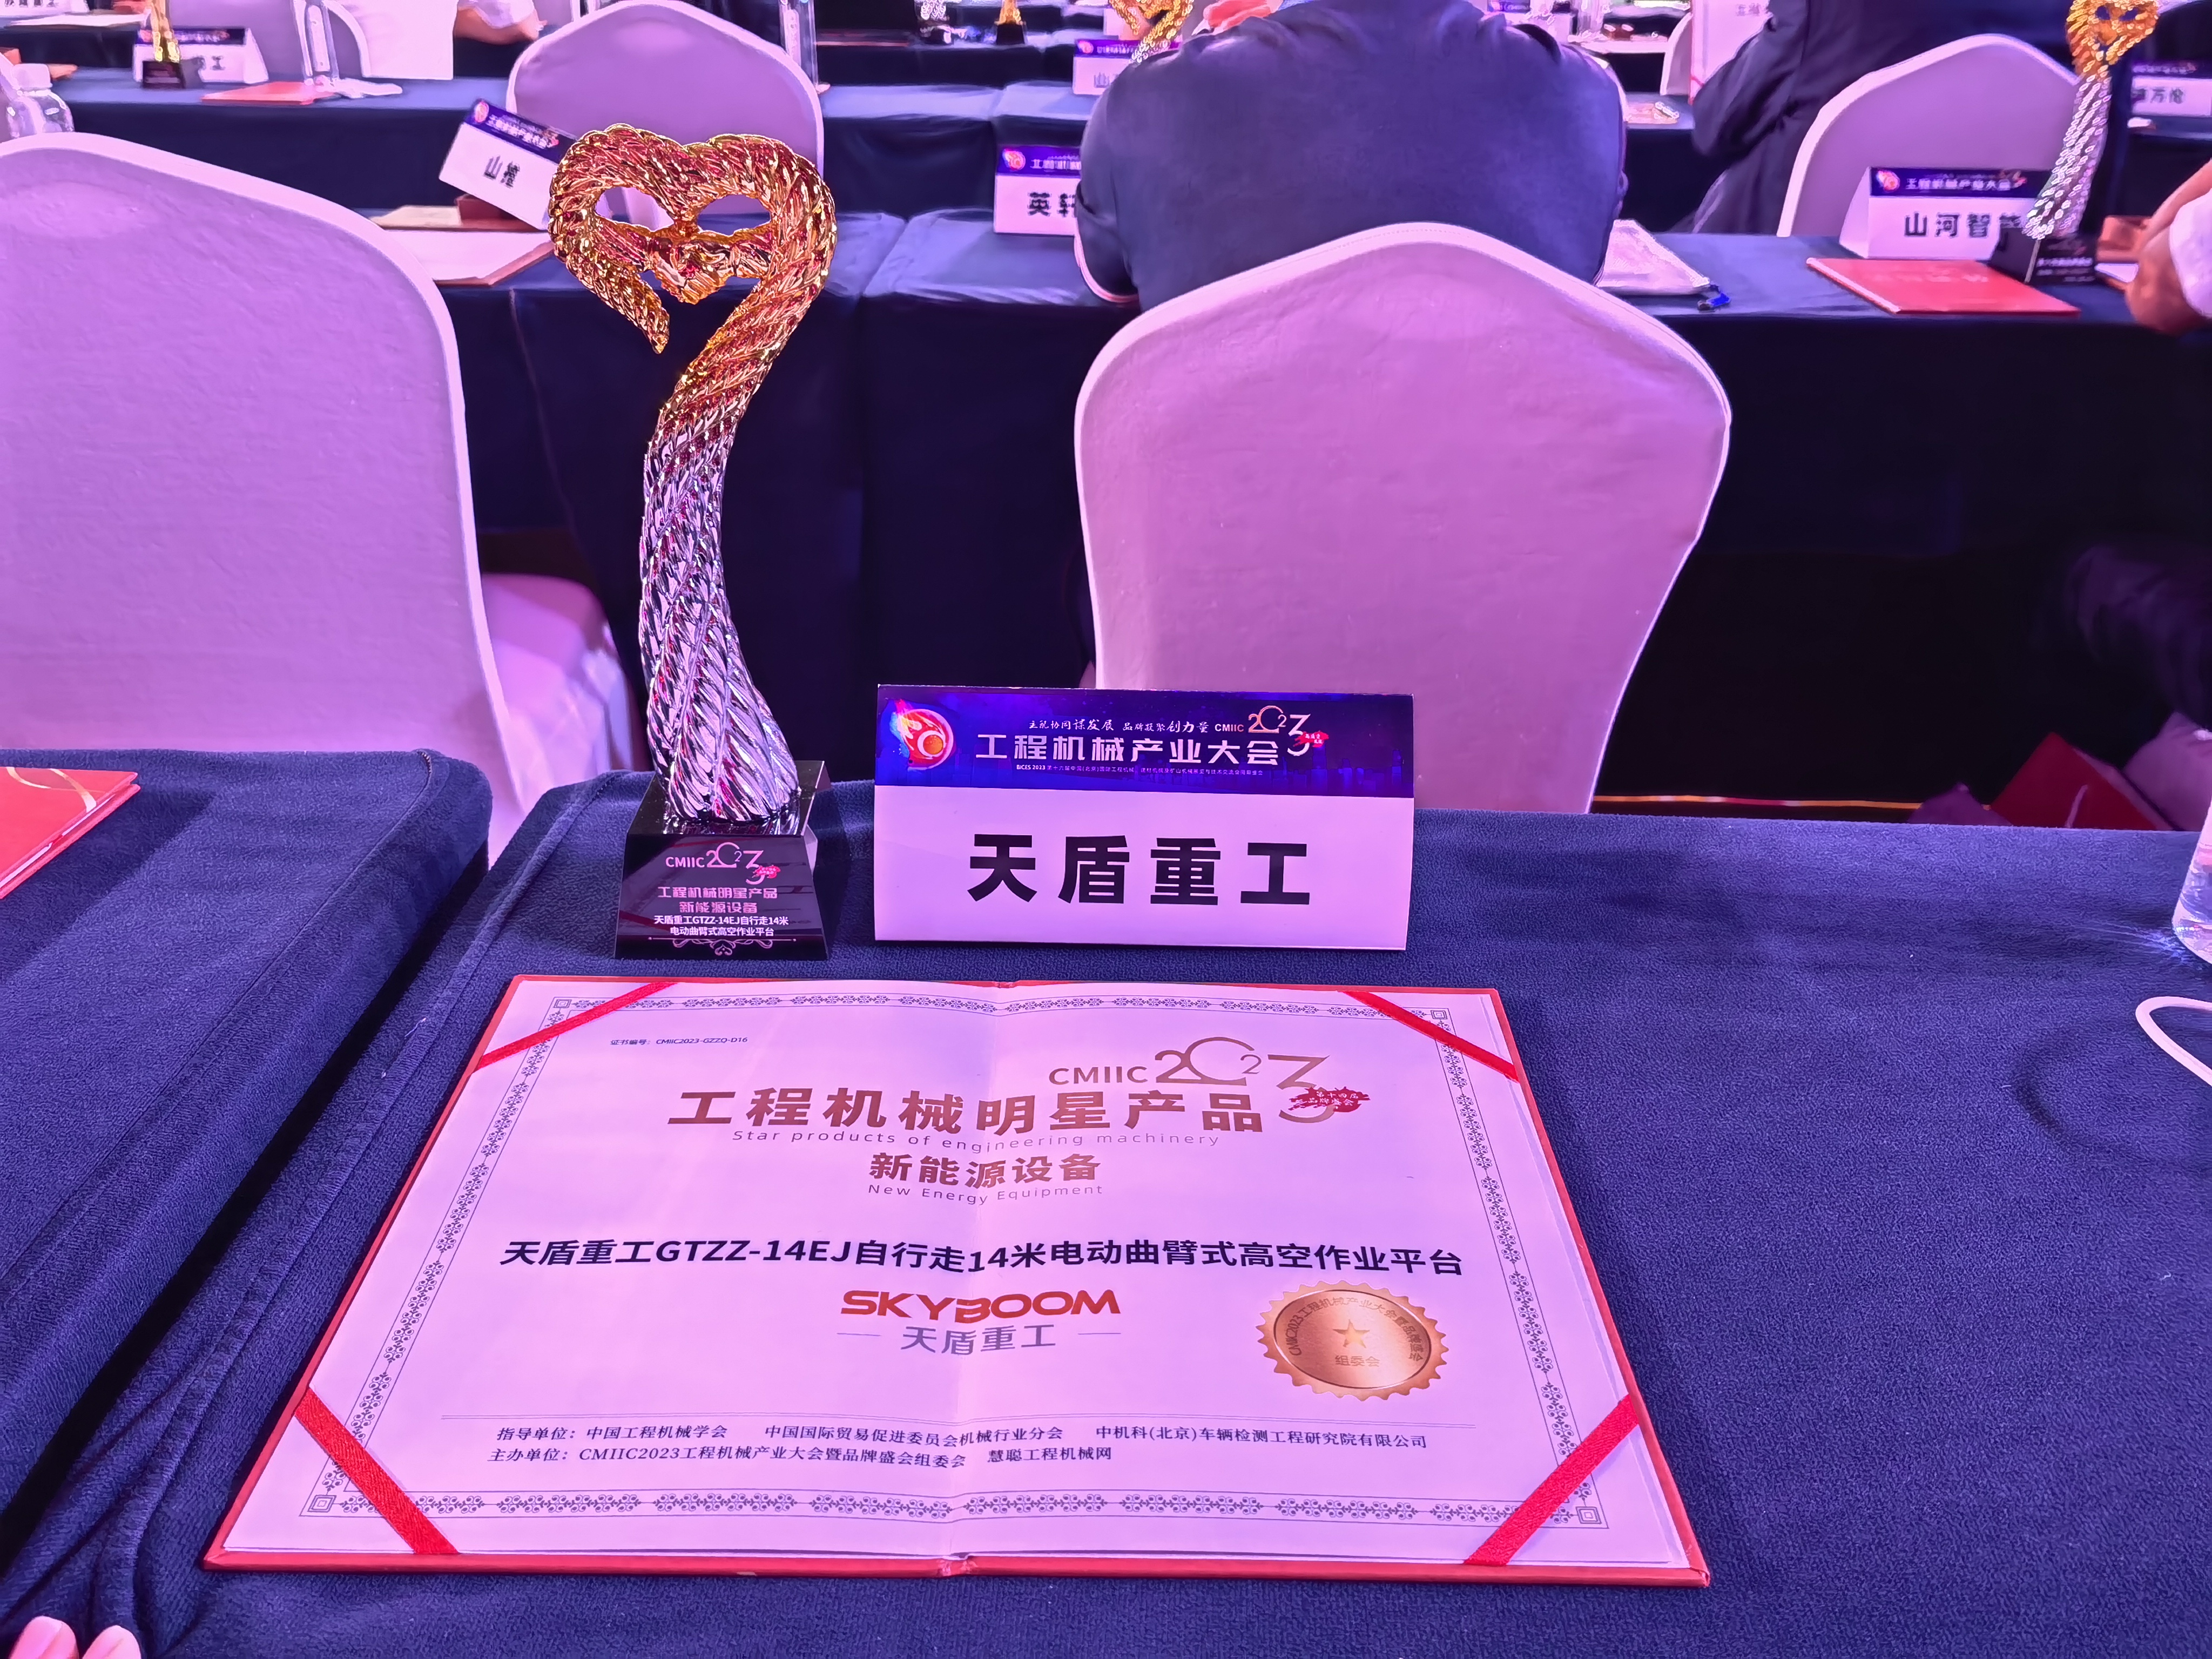 SKYBOOM received the big award CMIIC 2023 Construction Machinery Industry Conference 